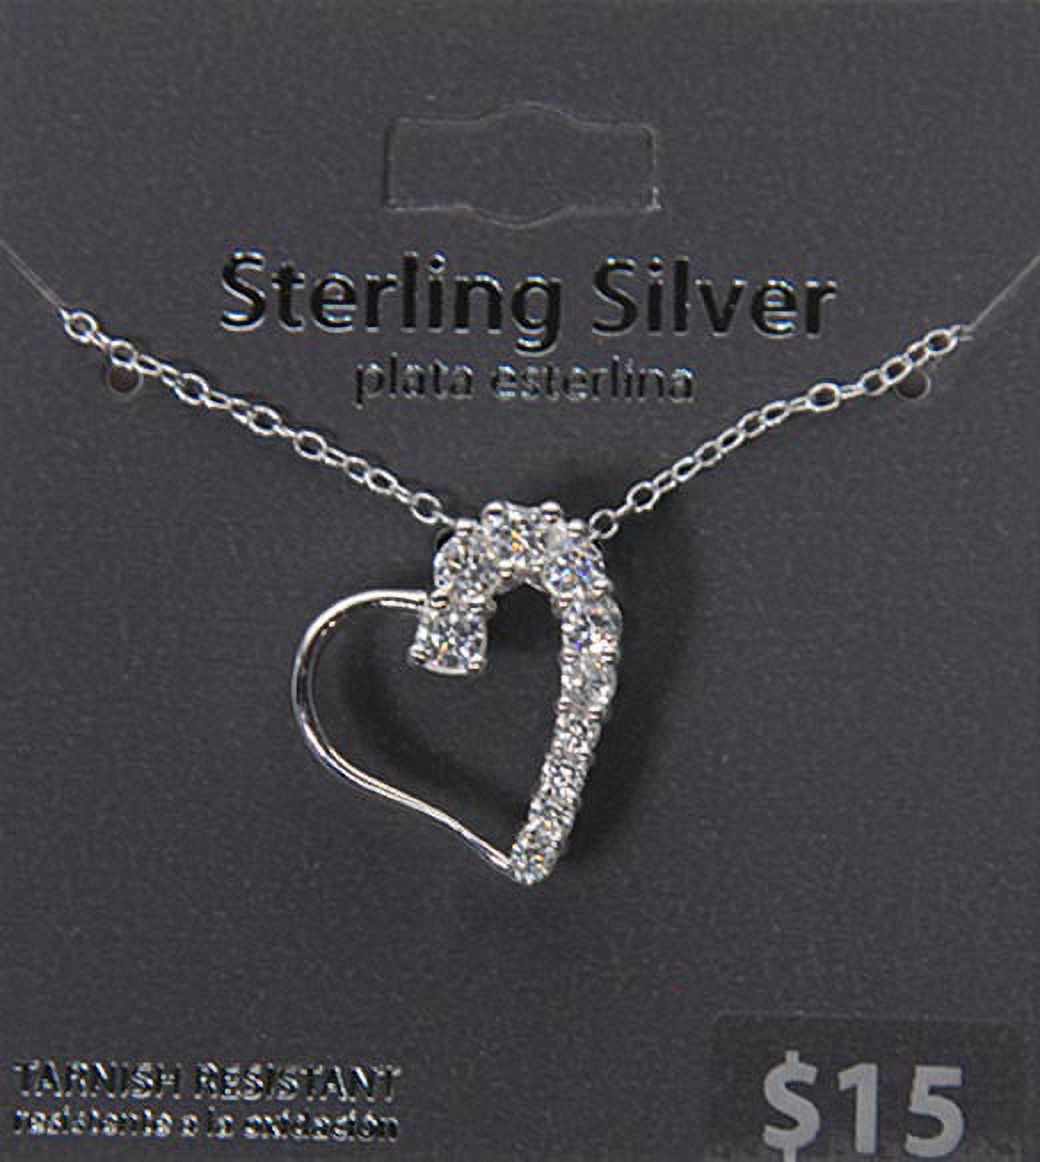 CZ Sterling Silver Heart Pendant, 18" - image 3 of 4